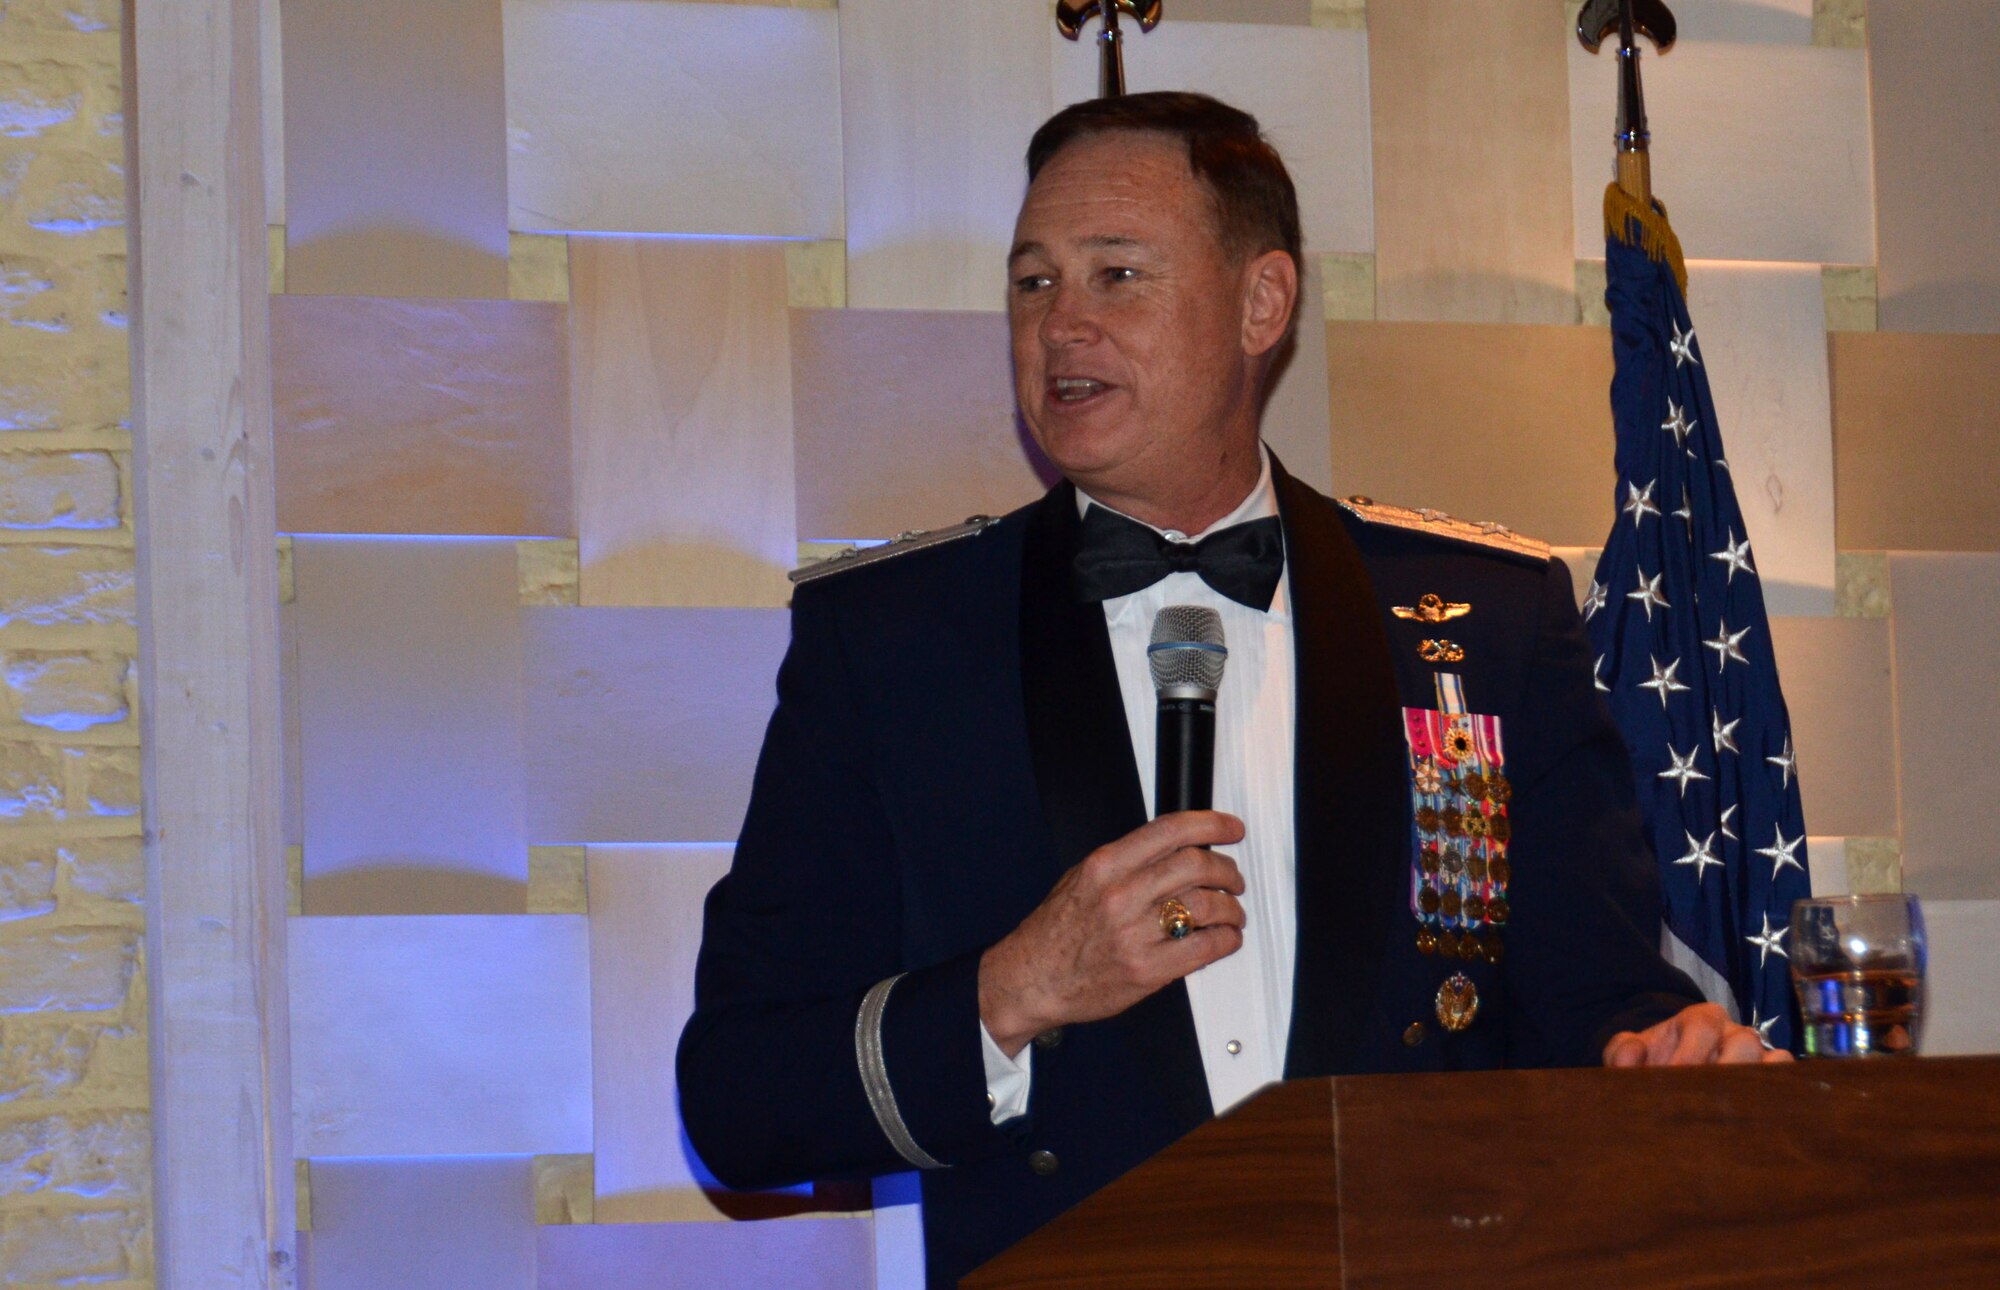 Air Force District of Washington Commander Maj. Gen.
Darryl Burke speaks at the Tri-Border U.S. Air Force Ball in Geilenkirchen,
Germany Oct. 9, 2015. Burke, Commander of NATO's E3-A Component Flying
Squadron One from 2001-2003, spoke about the rich history of the U.S. Air
Force and how Airmen of today are rising to the occasion to confront future
challenges. AFDW provides full-spectrum operational support including
personnel, legal, financial, contracting, and aircrew management to
approximately 26,000 Airmen across the globe. (Courtesy Photo)
